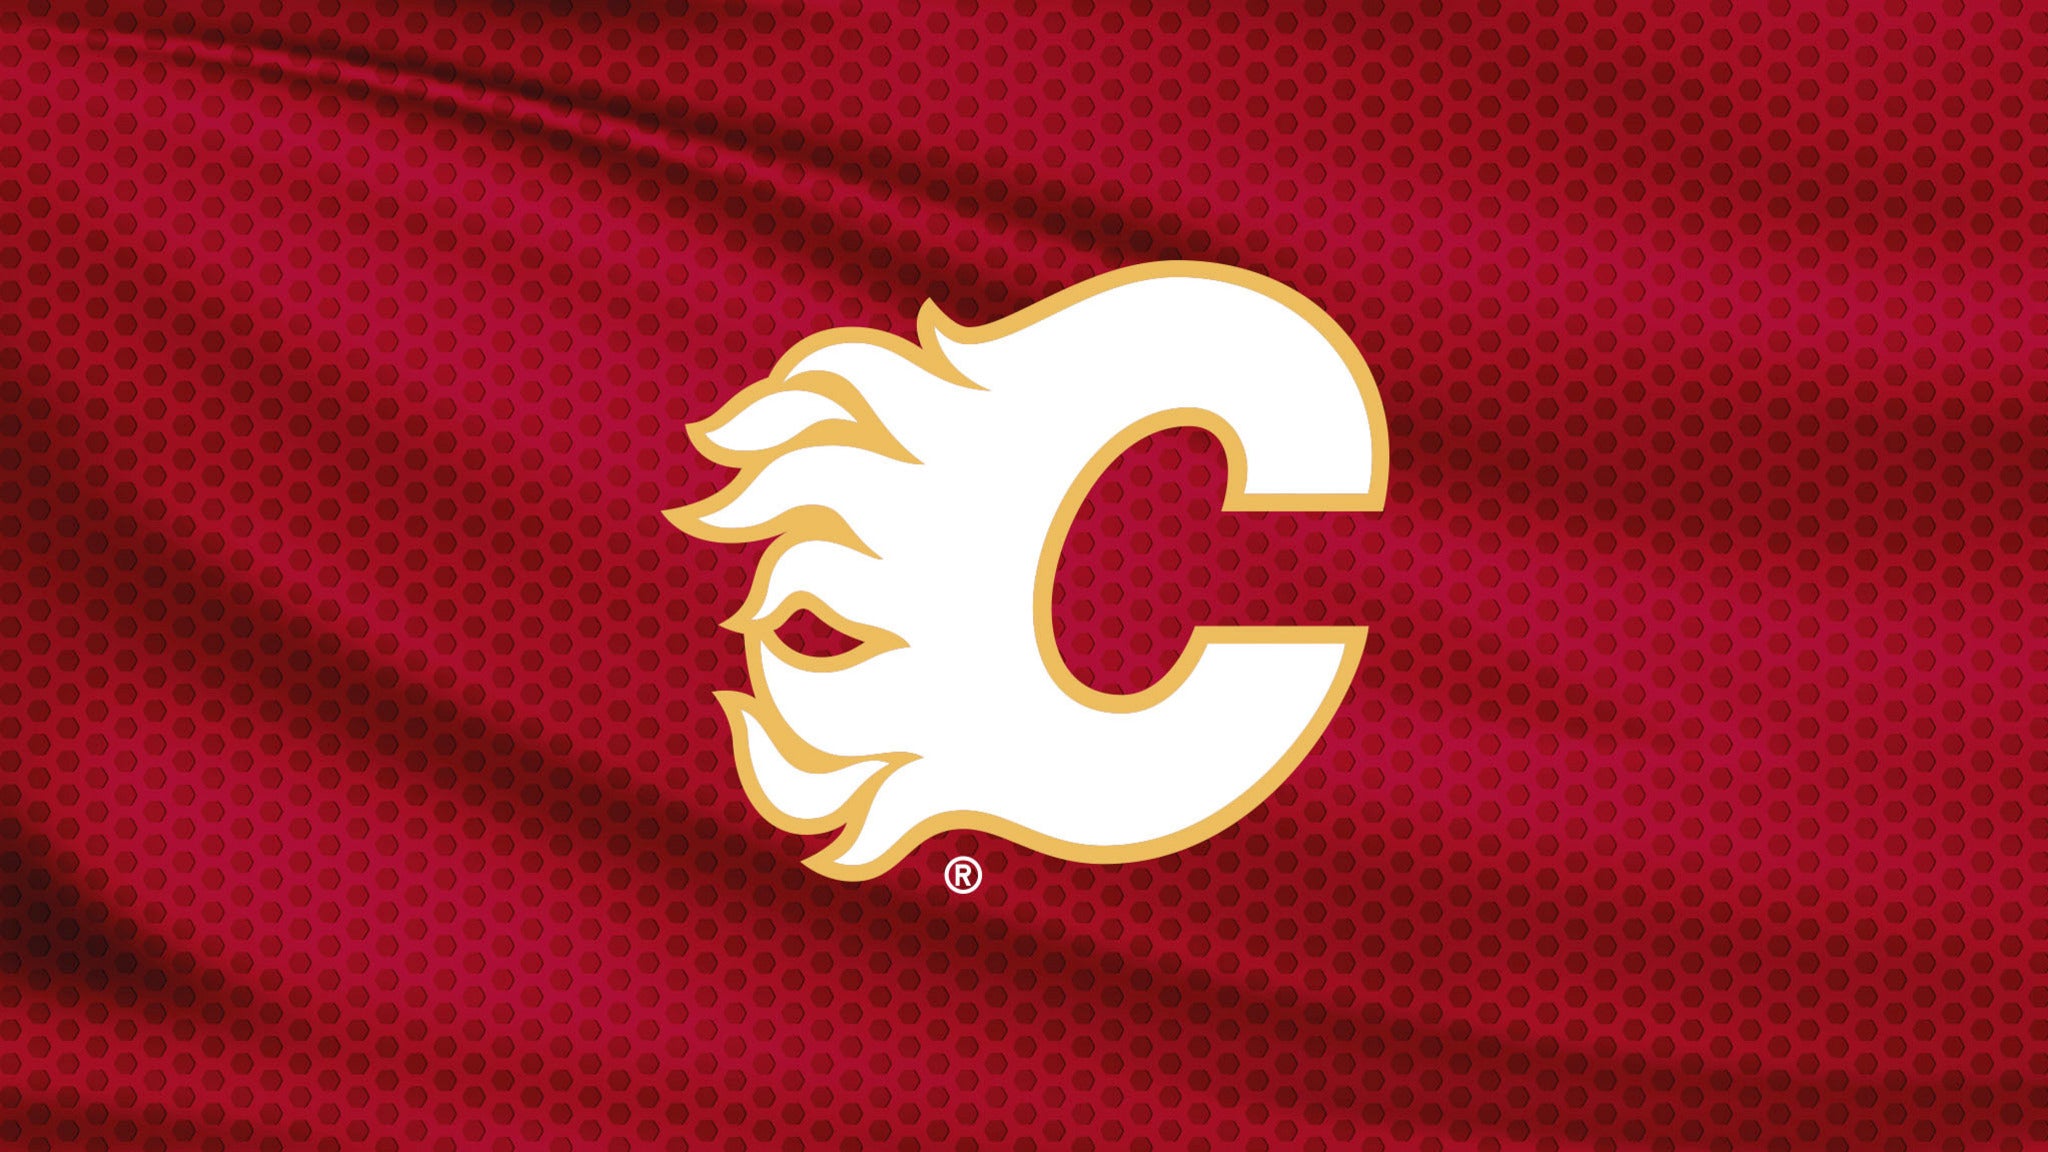 Calgary Flames Tickets | 2022 NHL Tickets & Schedule | Ticketmaster